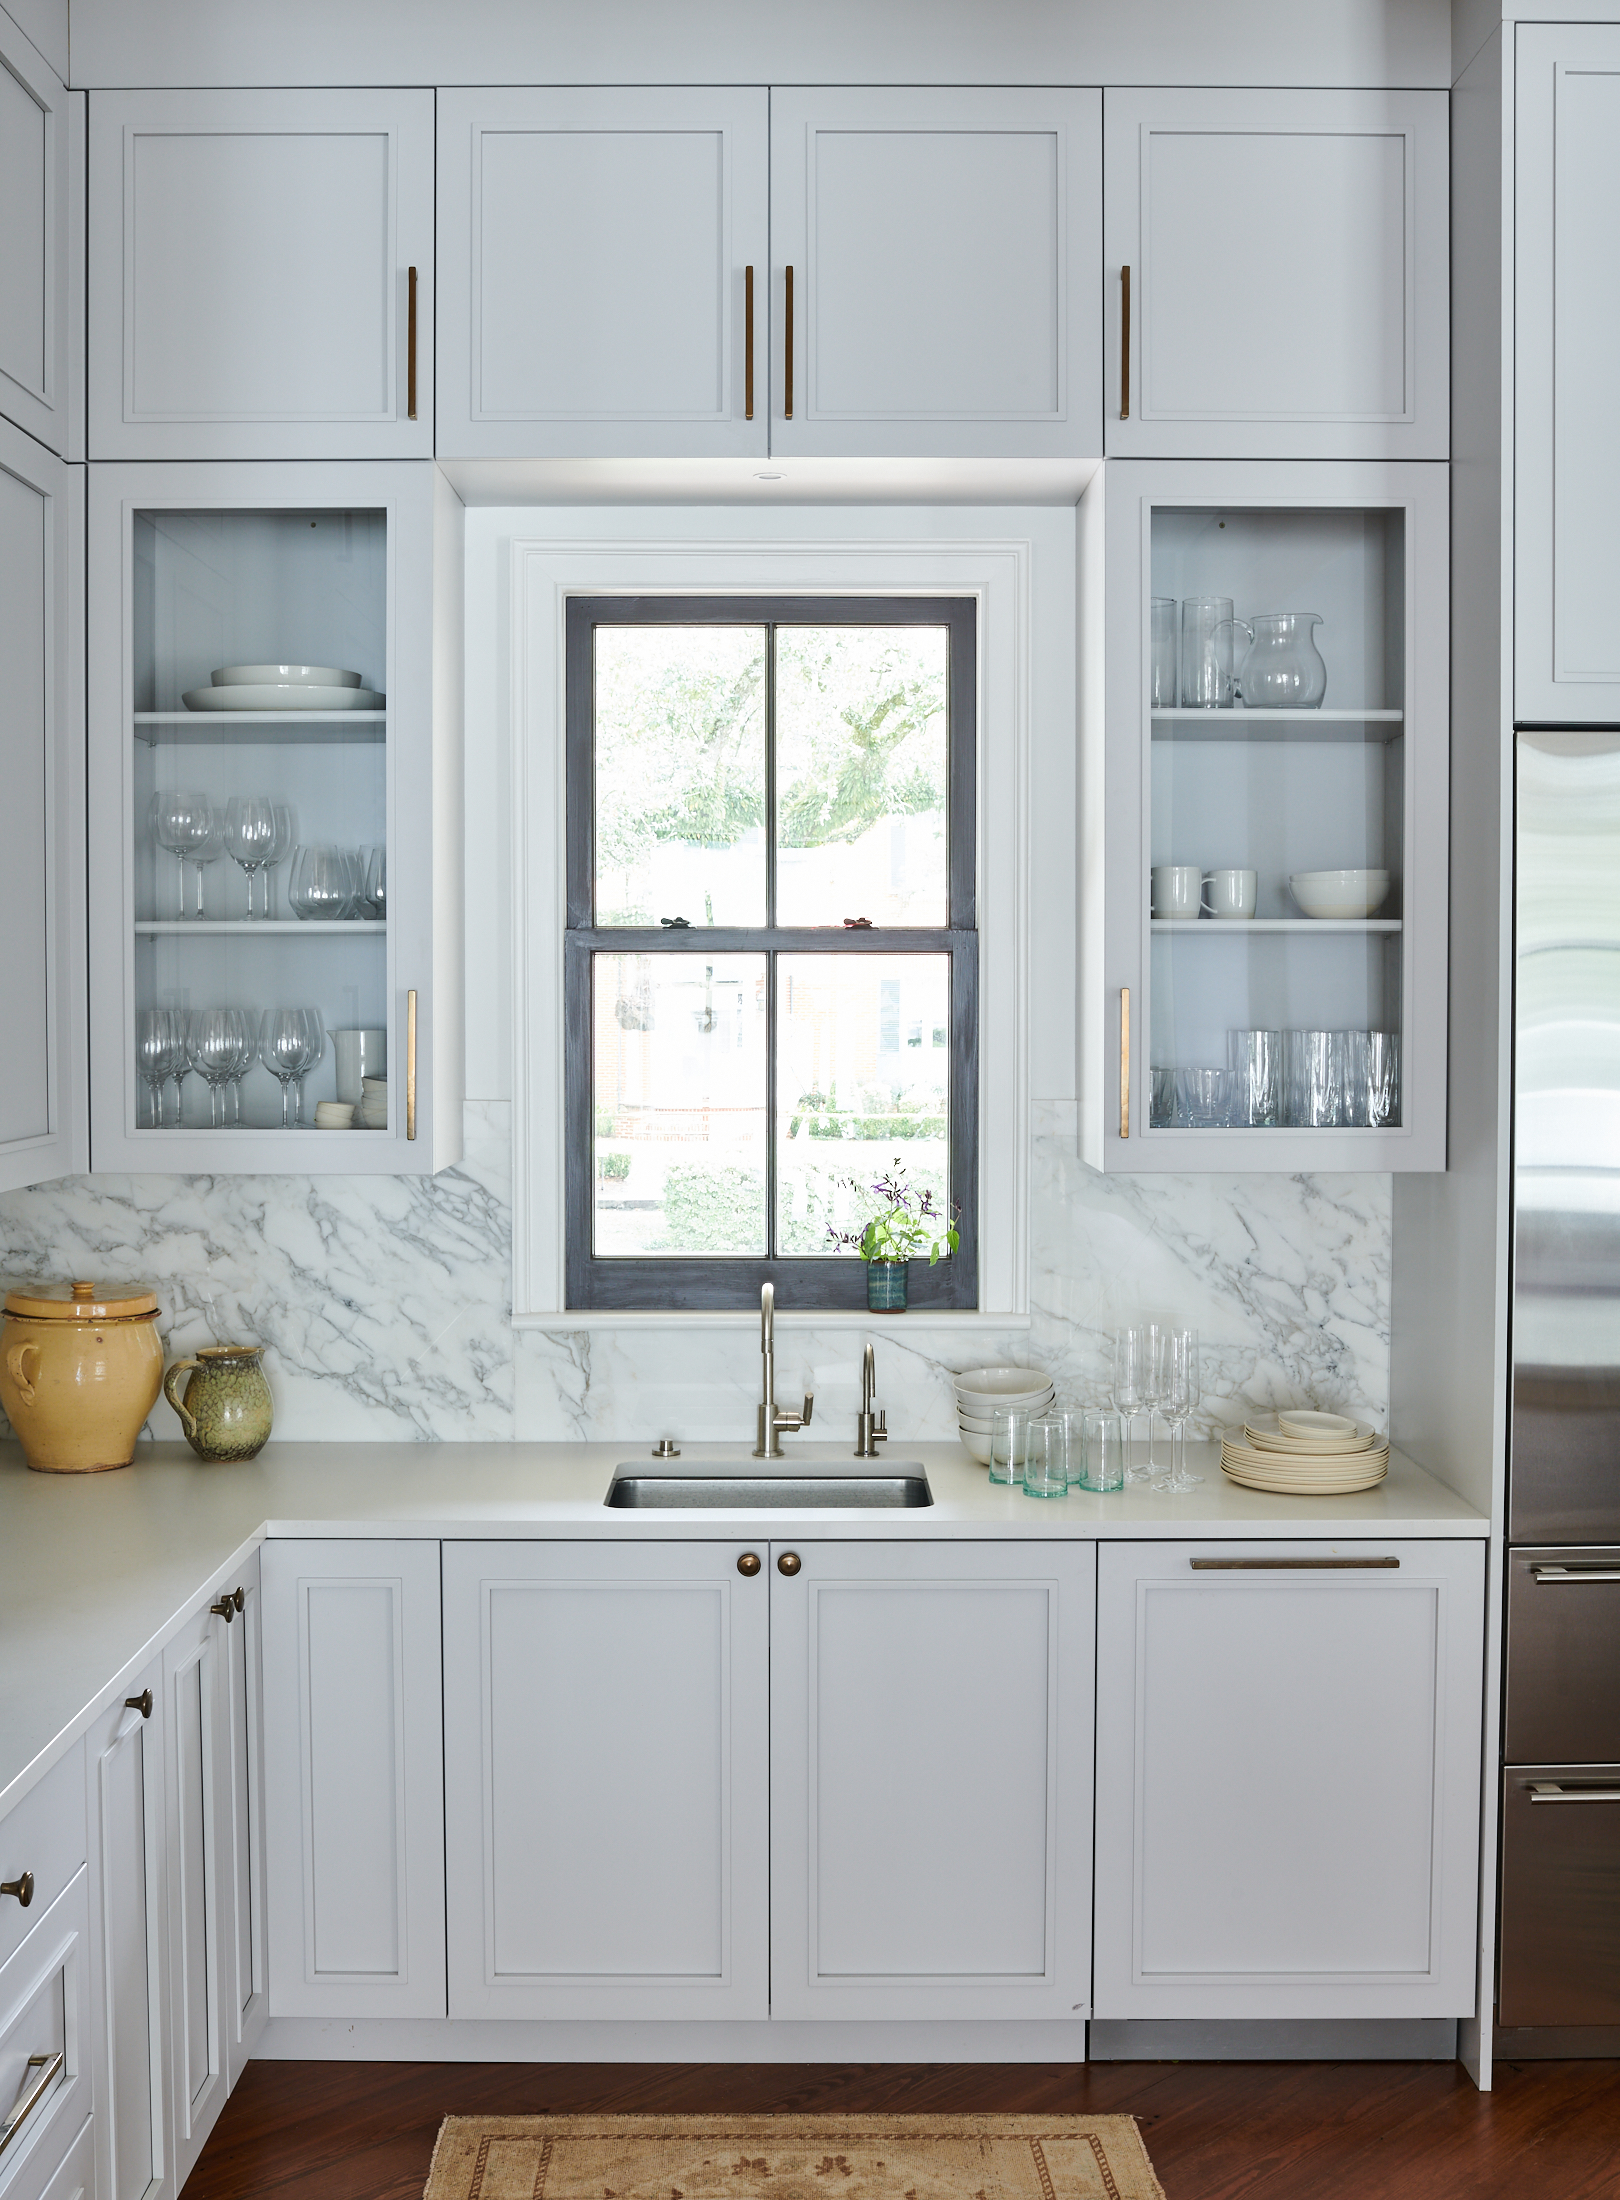 kitchen sink with window above it by Alison Gootee Photography for Logan Killen Interiors 